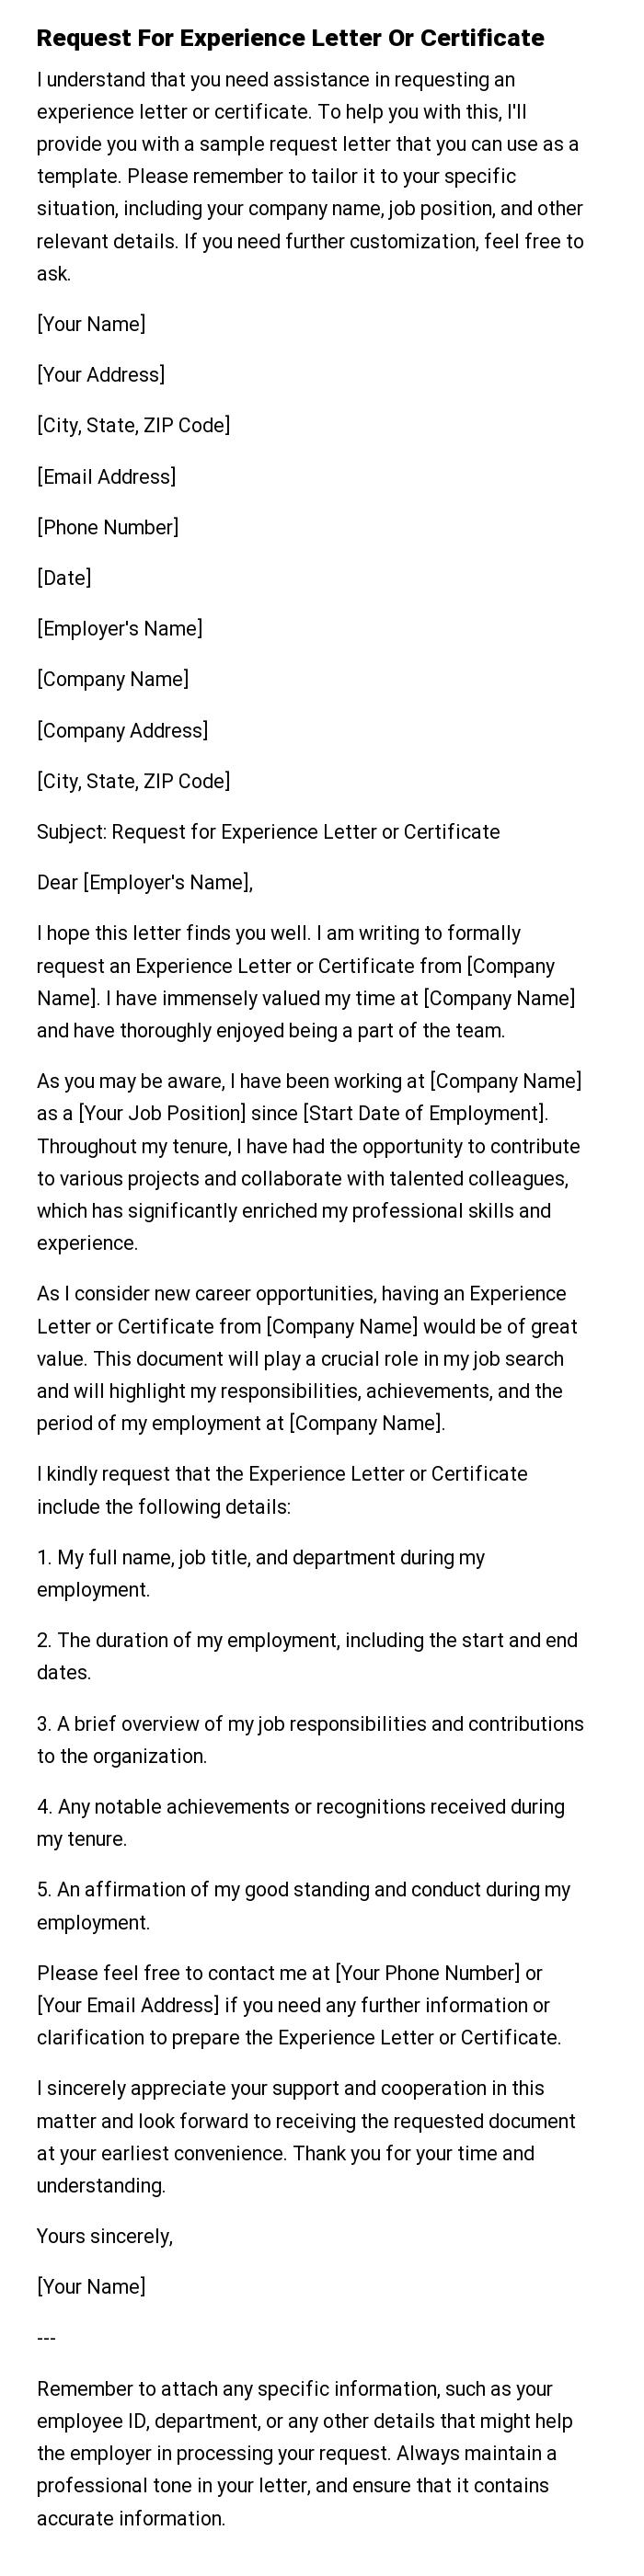 Request For Experience Letter Or Certificate